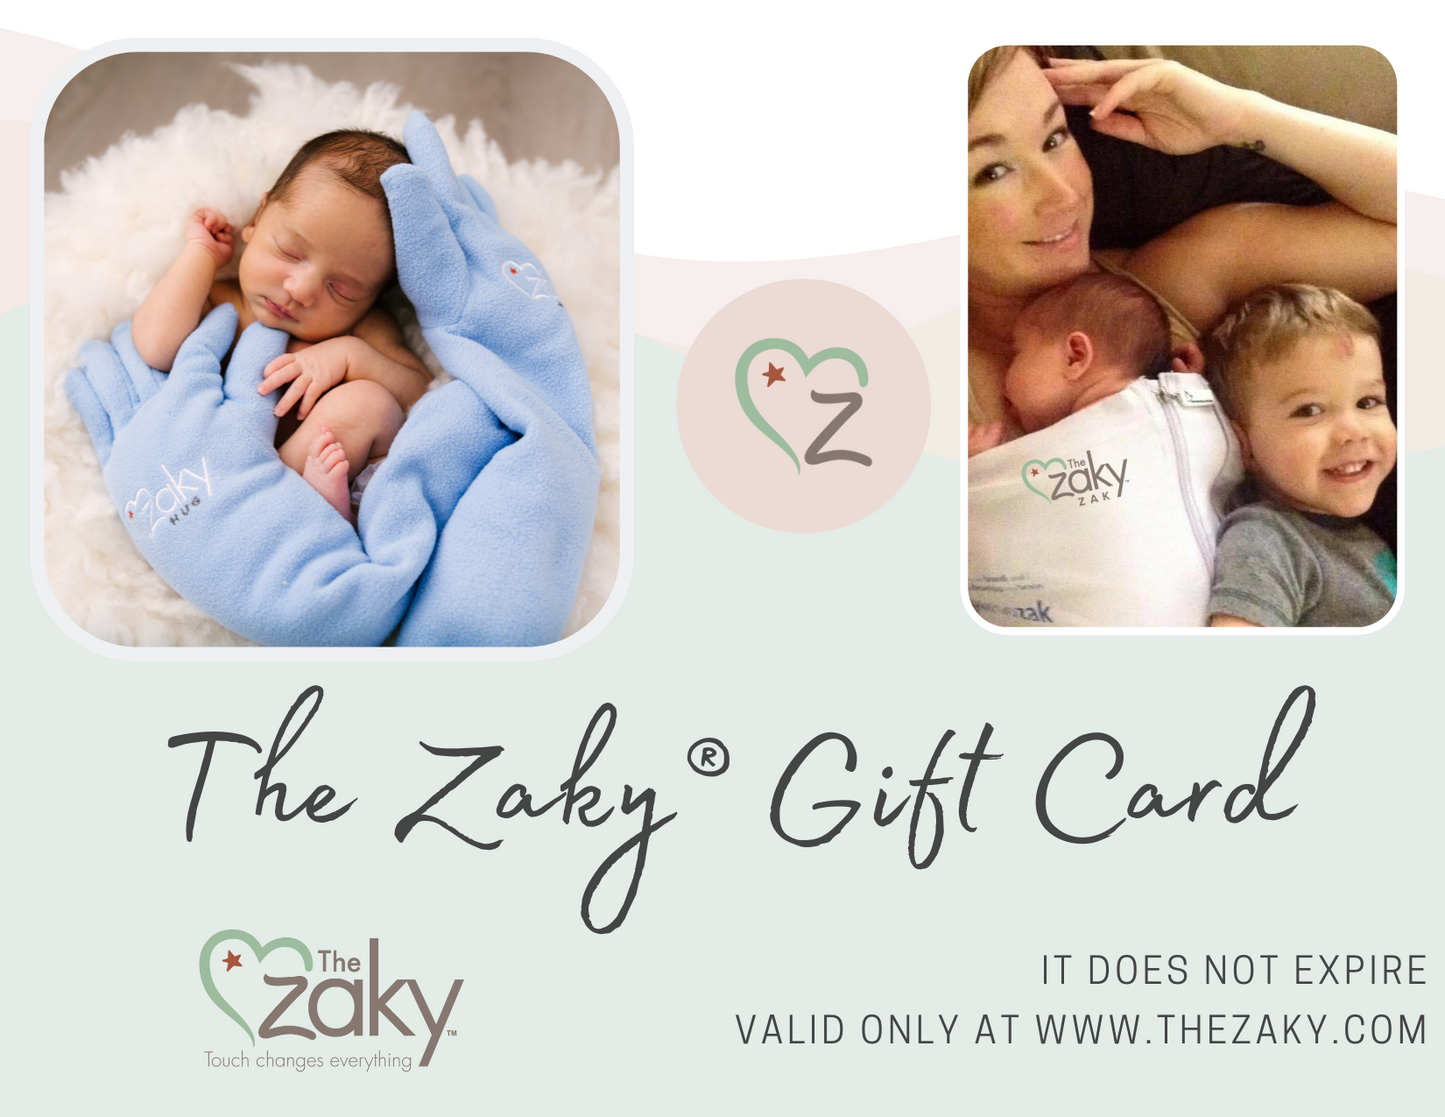 The most nurturing gift: An e-gift card for The Zaky®